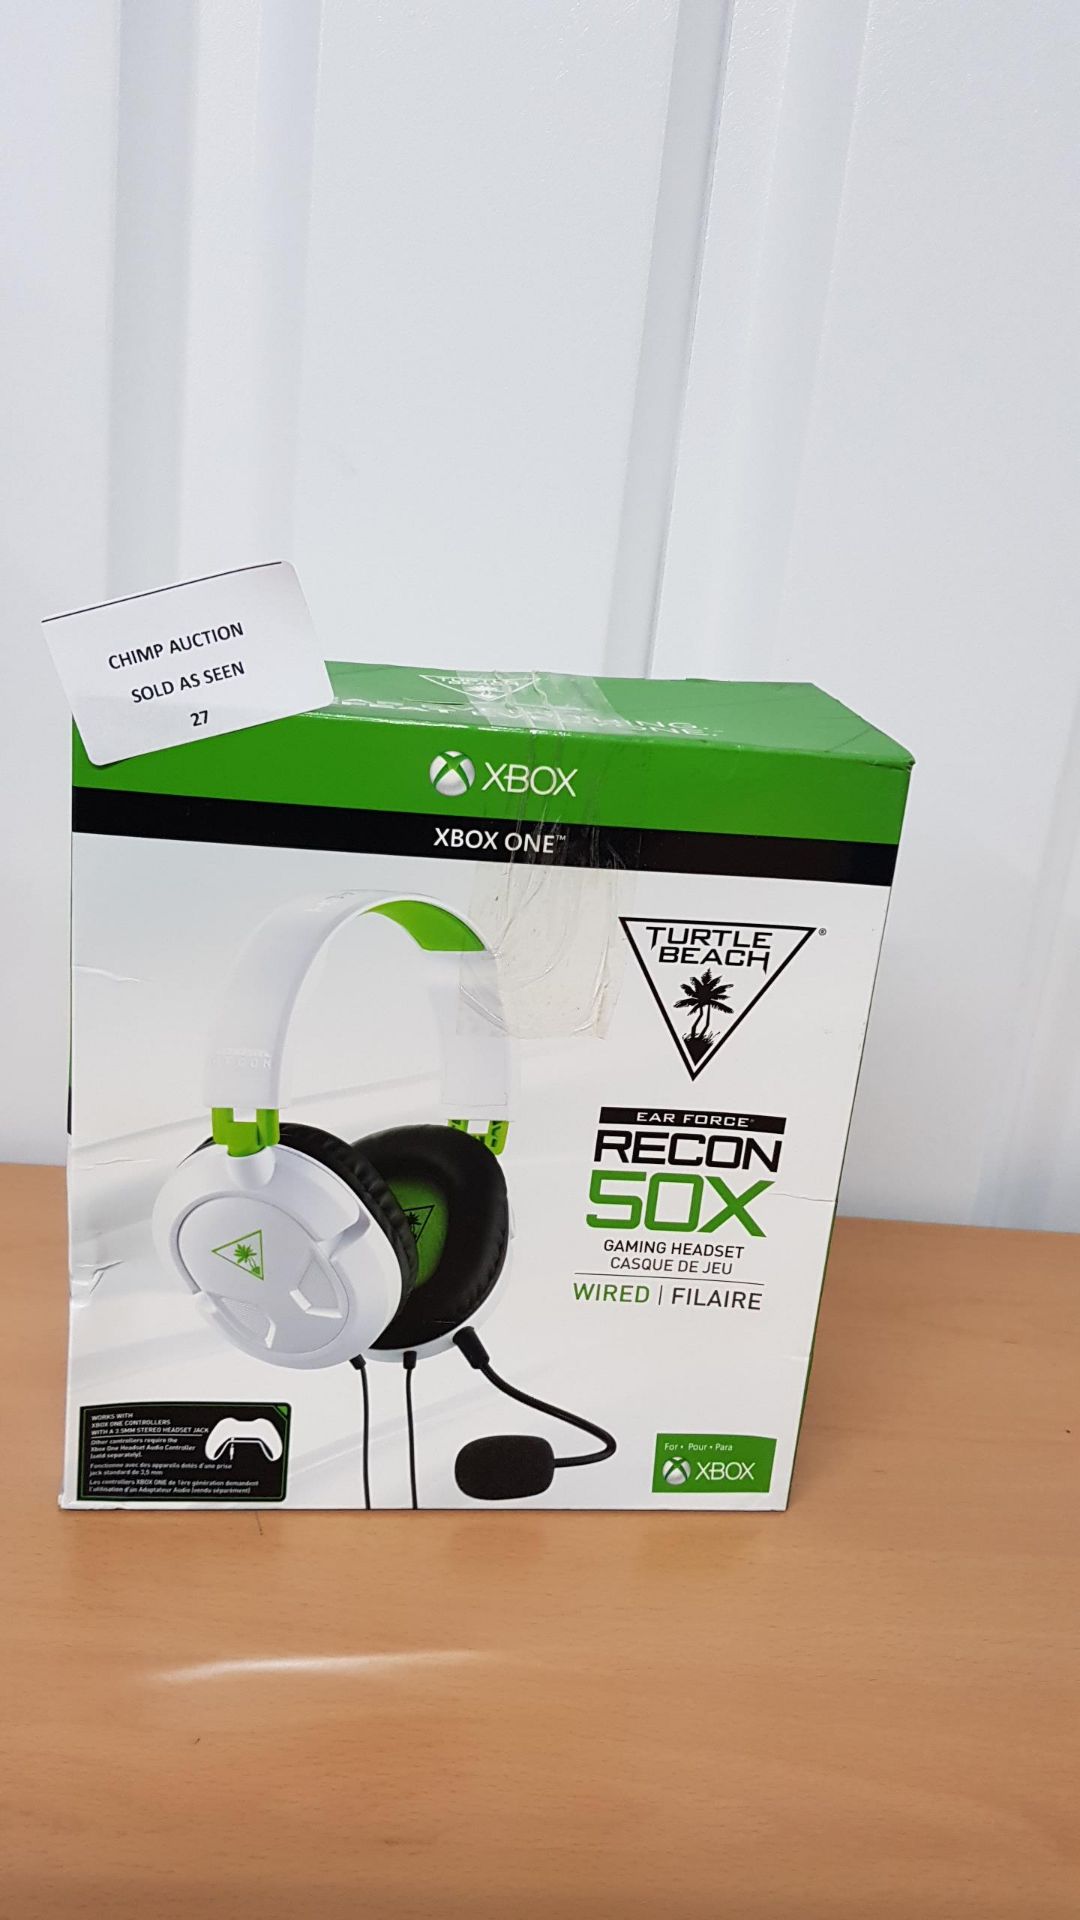 Turtle Beach Recon 50X Stereo Gaming Headset - Xbox One RRP £59.99.